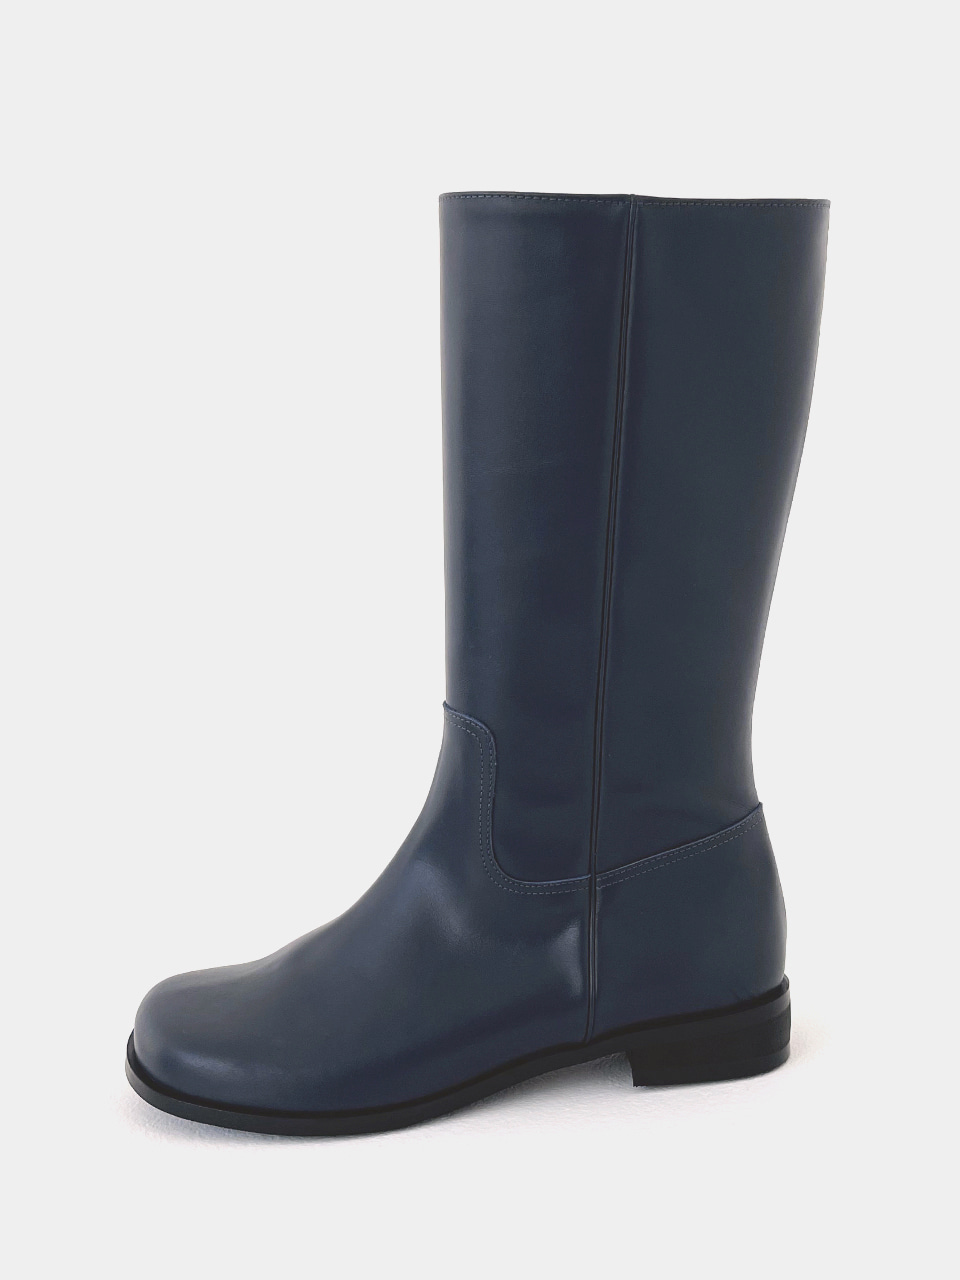 [Out of stock] [Exclusive] Mrc093 Diagonal Zipper Long Boots (Grey-Blue)